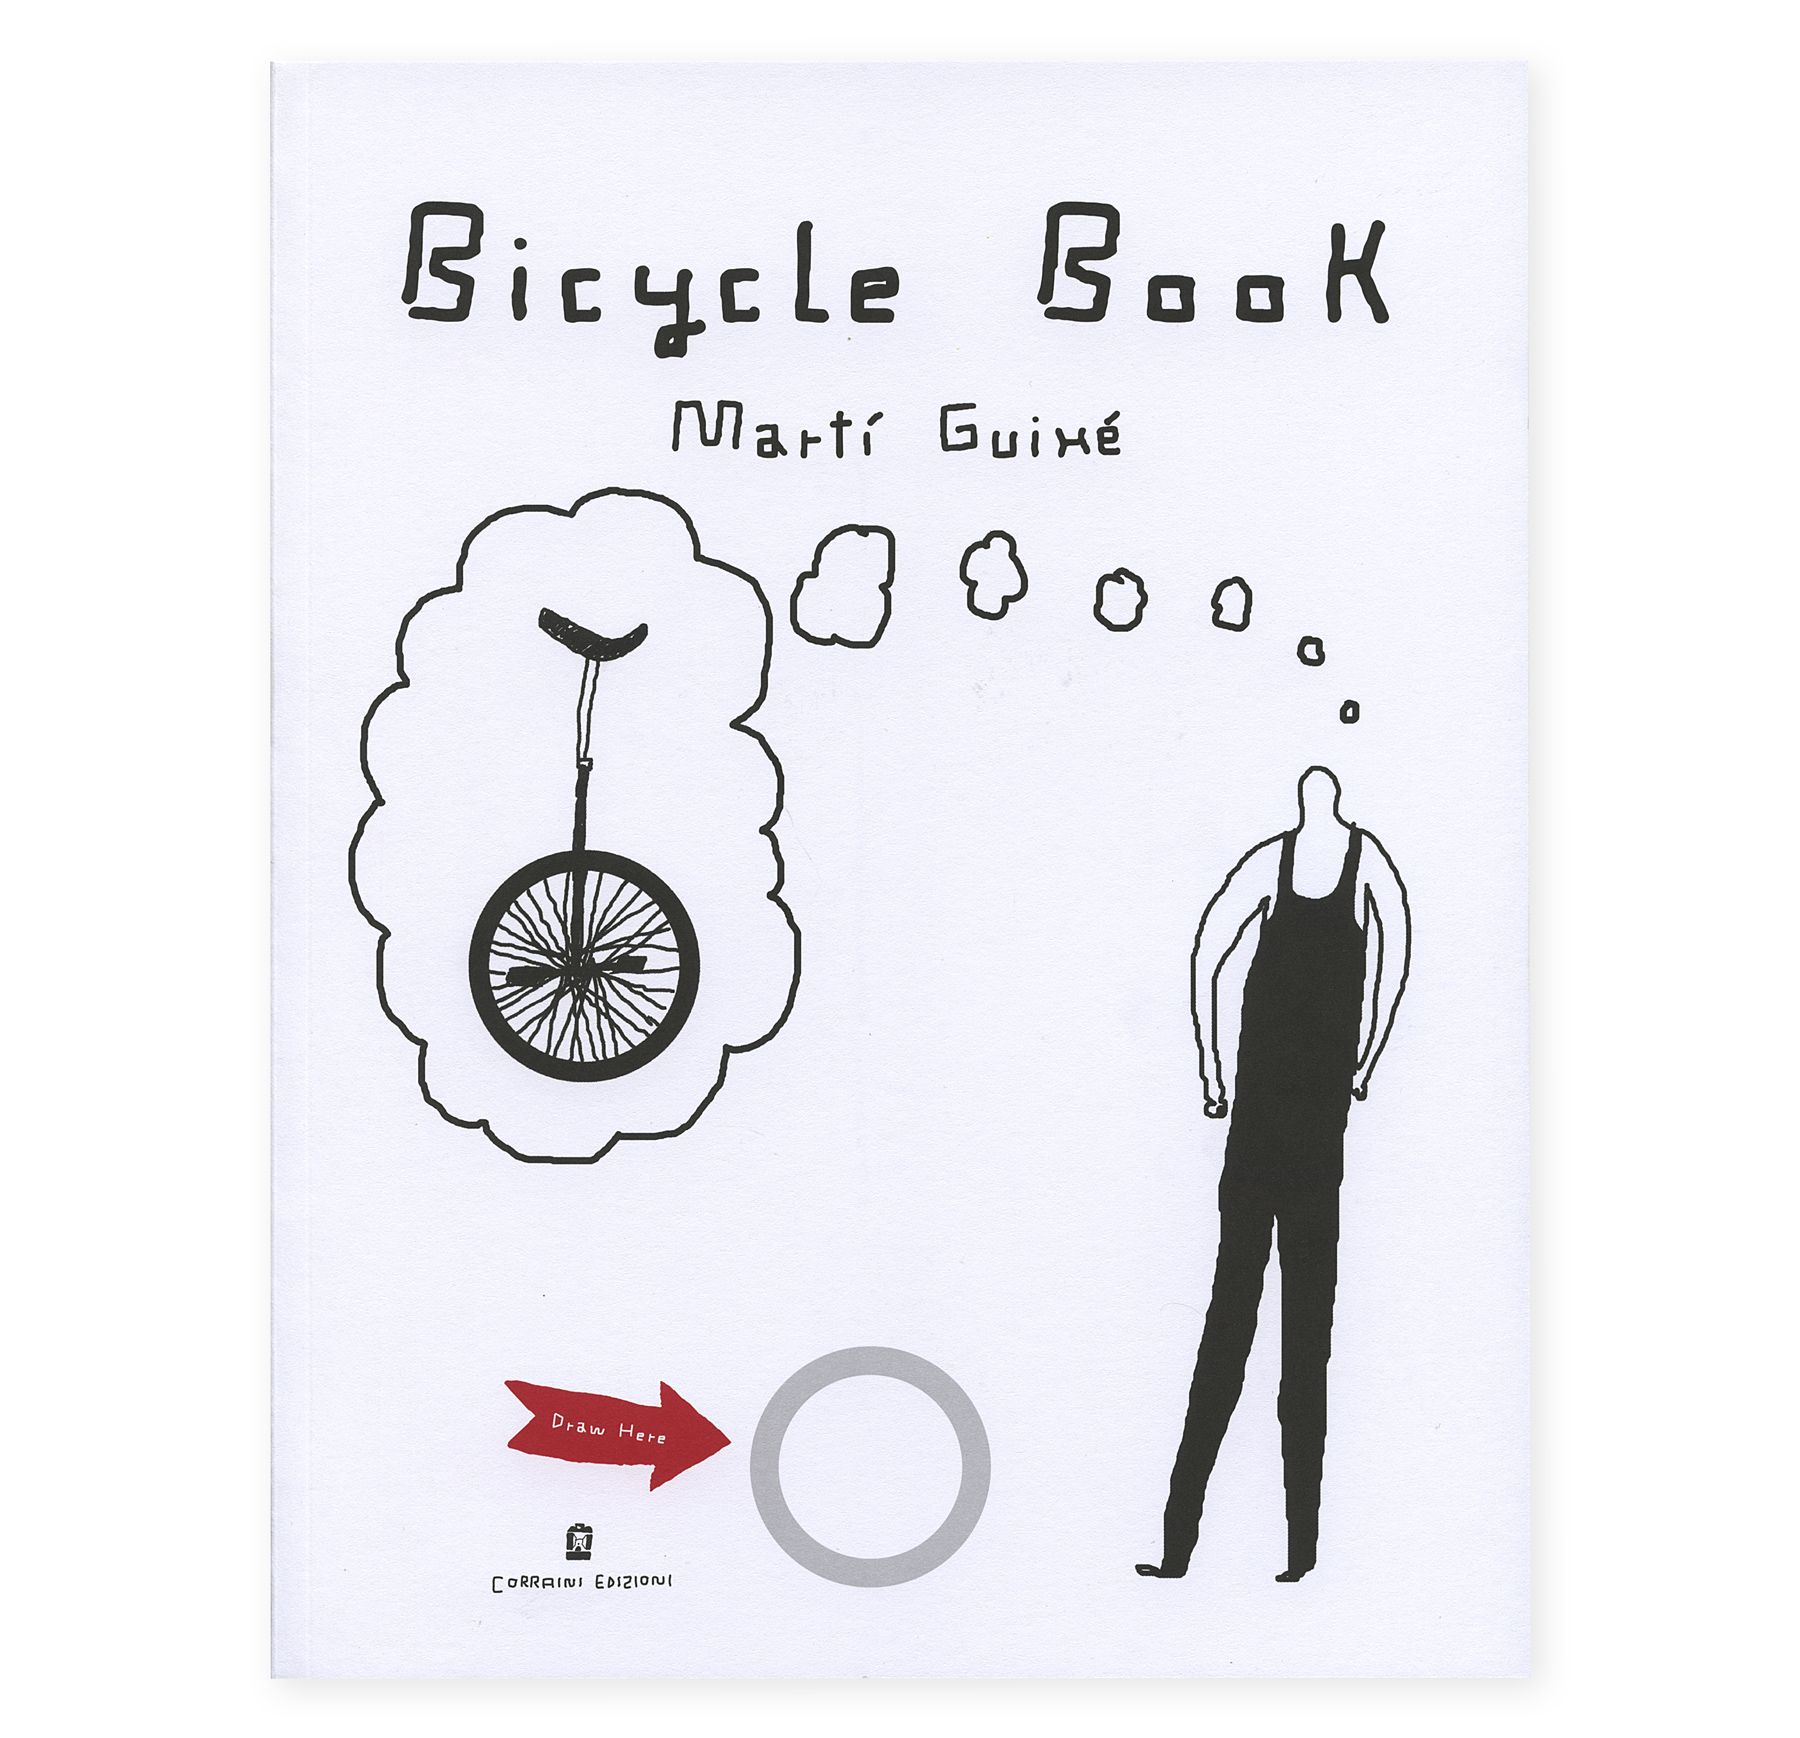 Bicycle Book: Marti Guixe cover